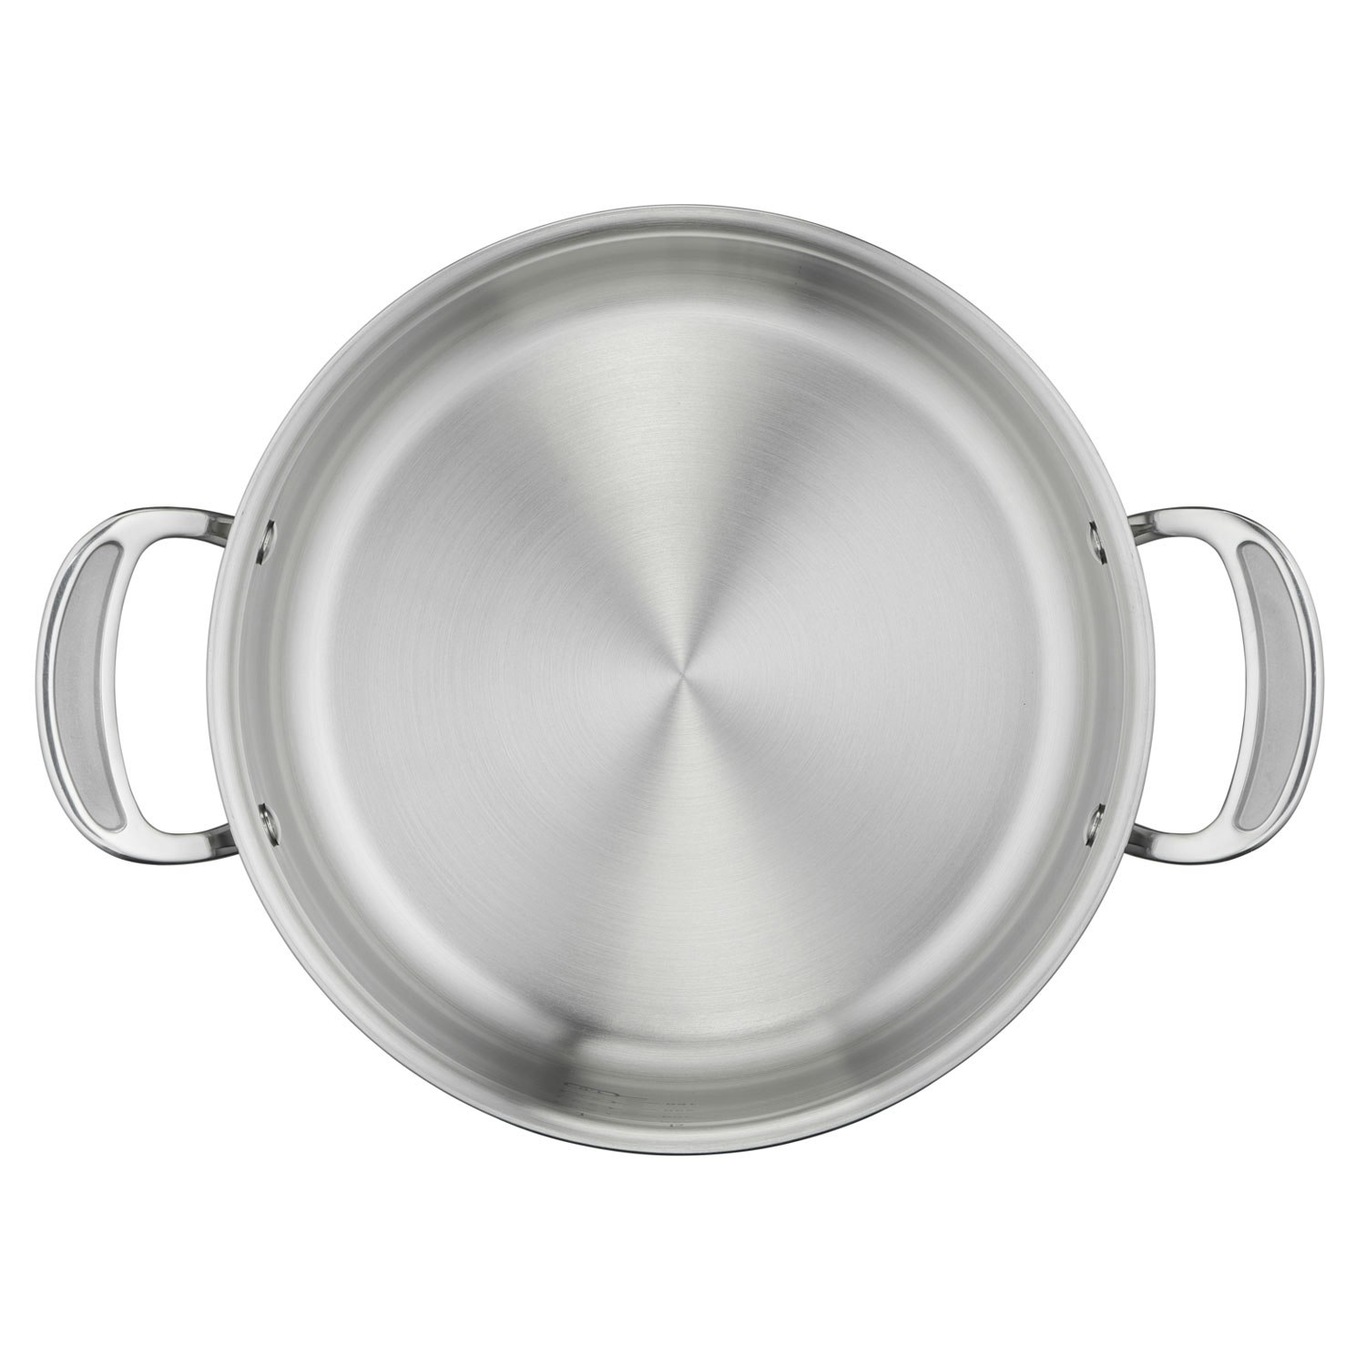 https://royaldesign.com/image/2/tefal-jamie-oliver-cooks-classic-pot-stainless-steel-1?w=800&quality=80